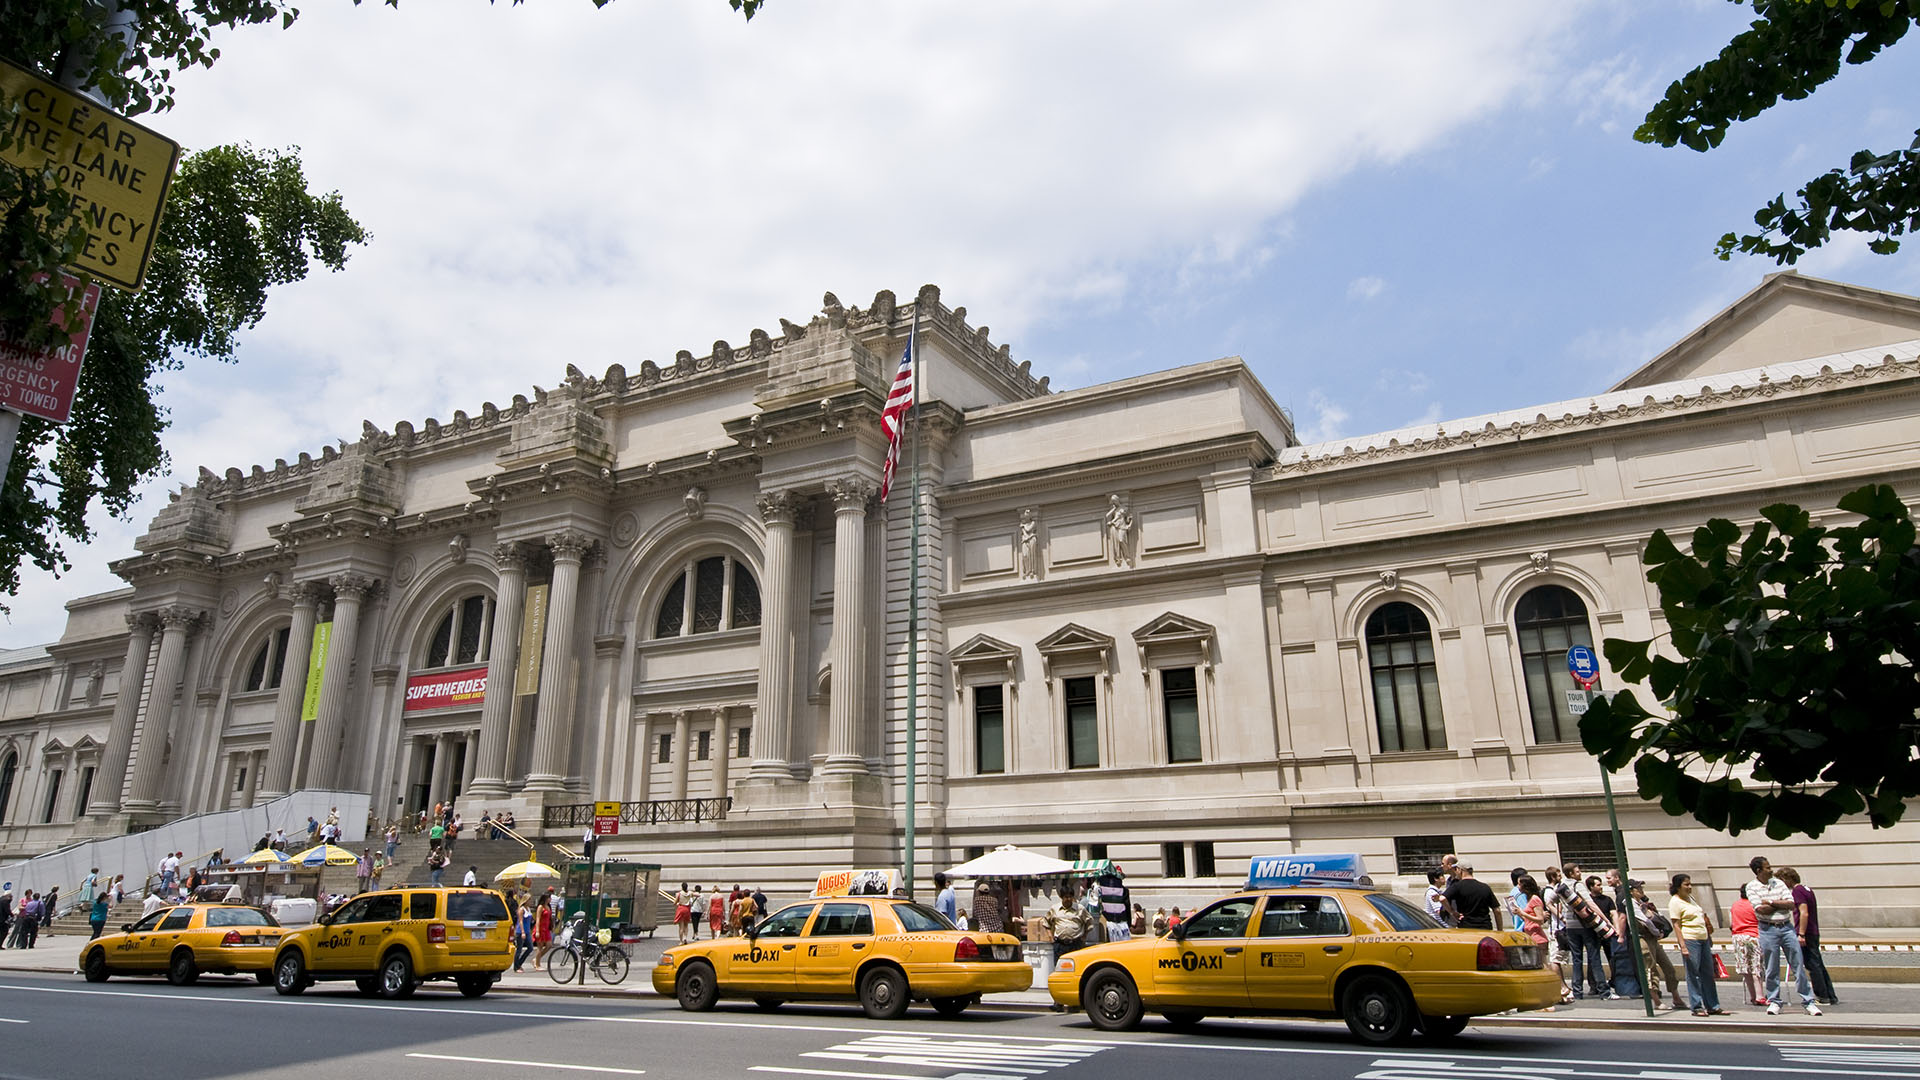 A line of yellow taxis outside the Metropolitan Museum of Art in New York